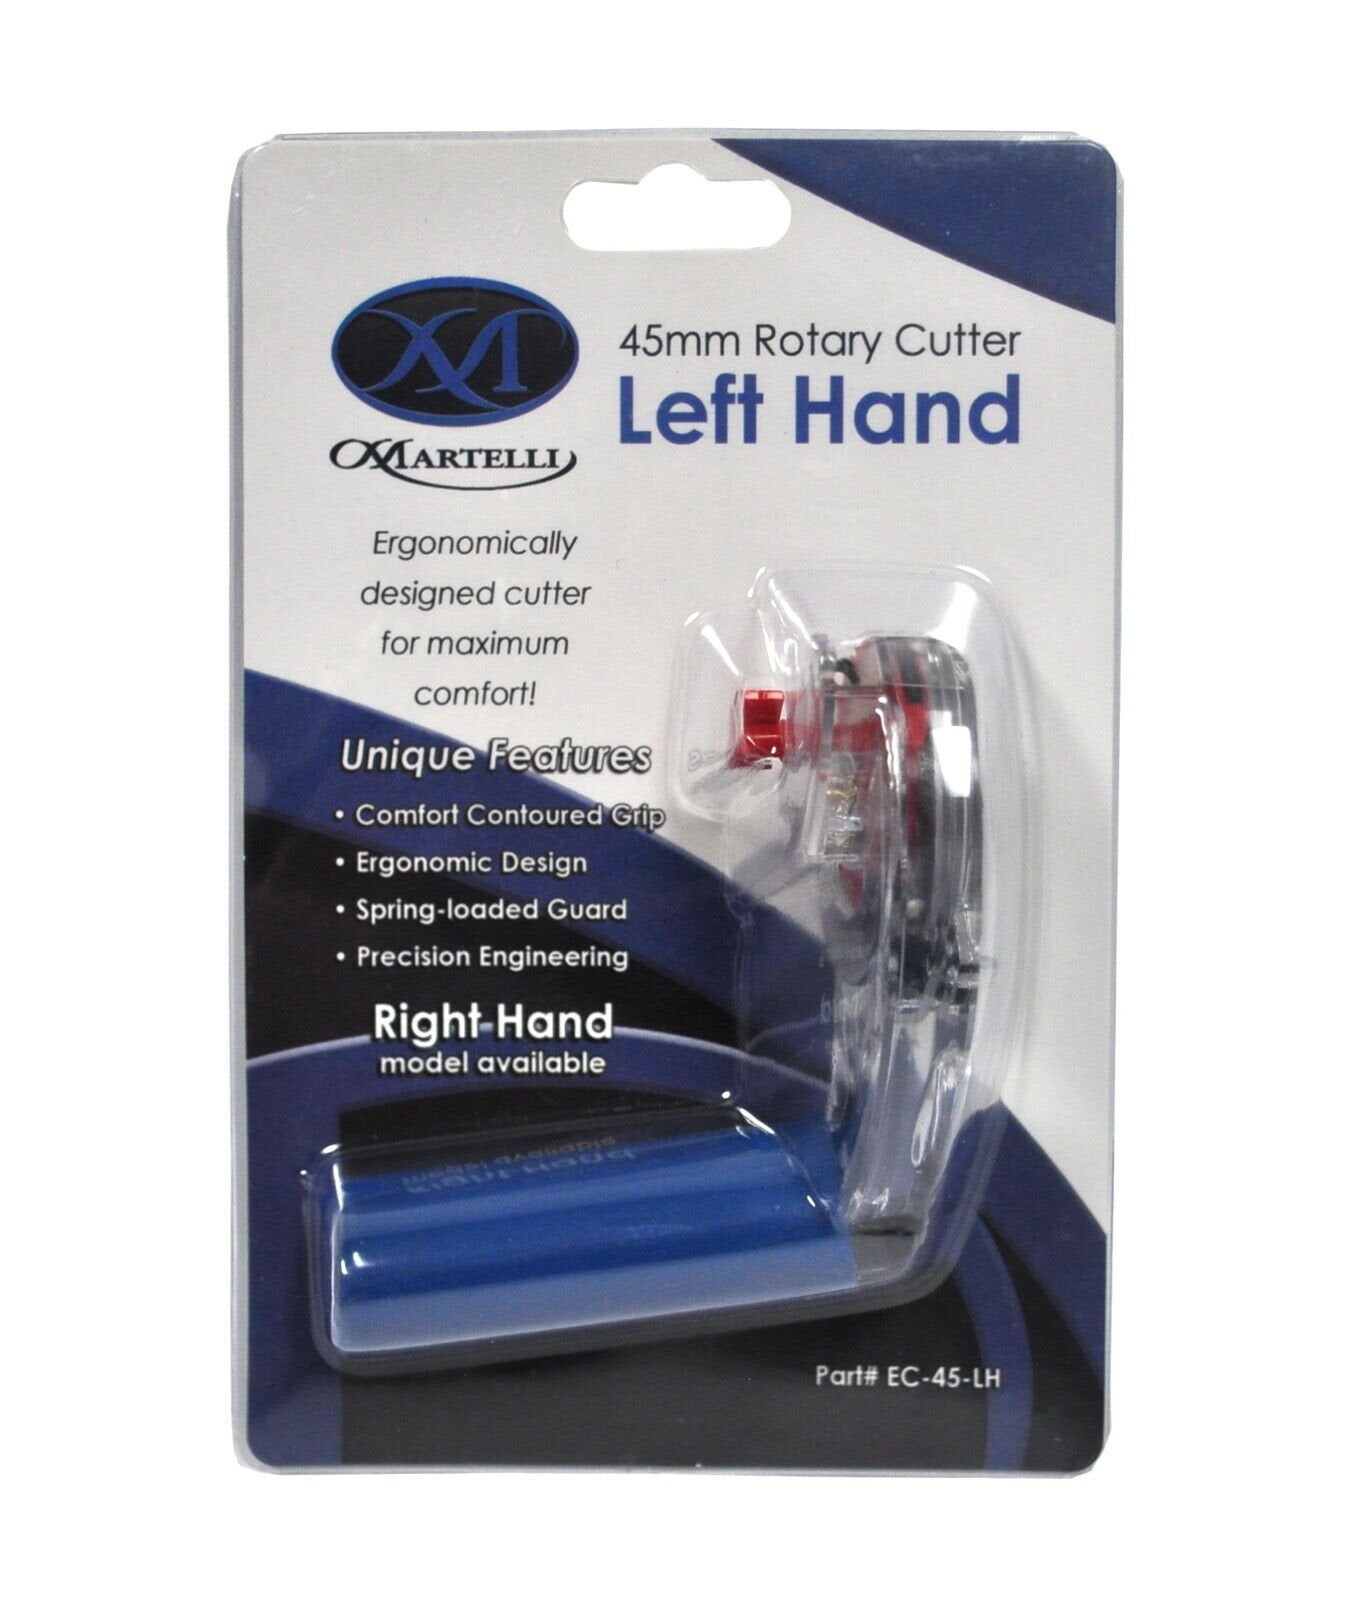 Left-Handed Rotary Cutter - 45 mm